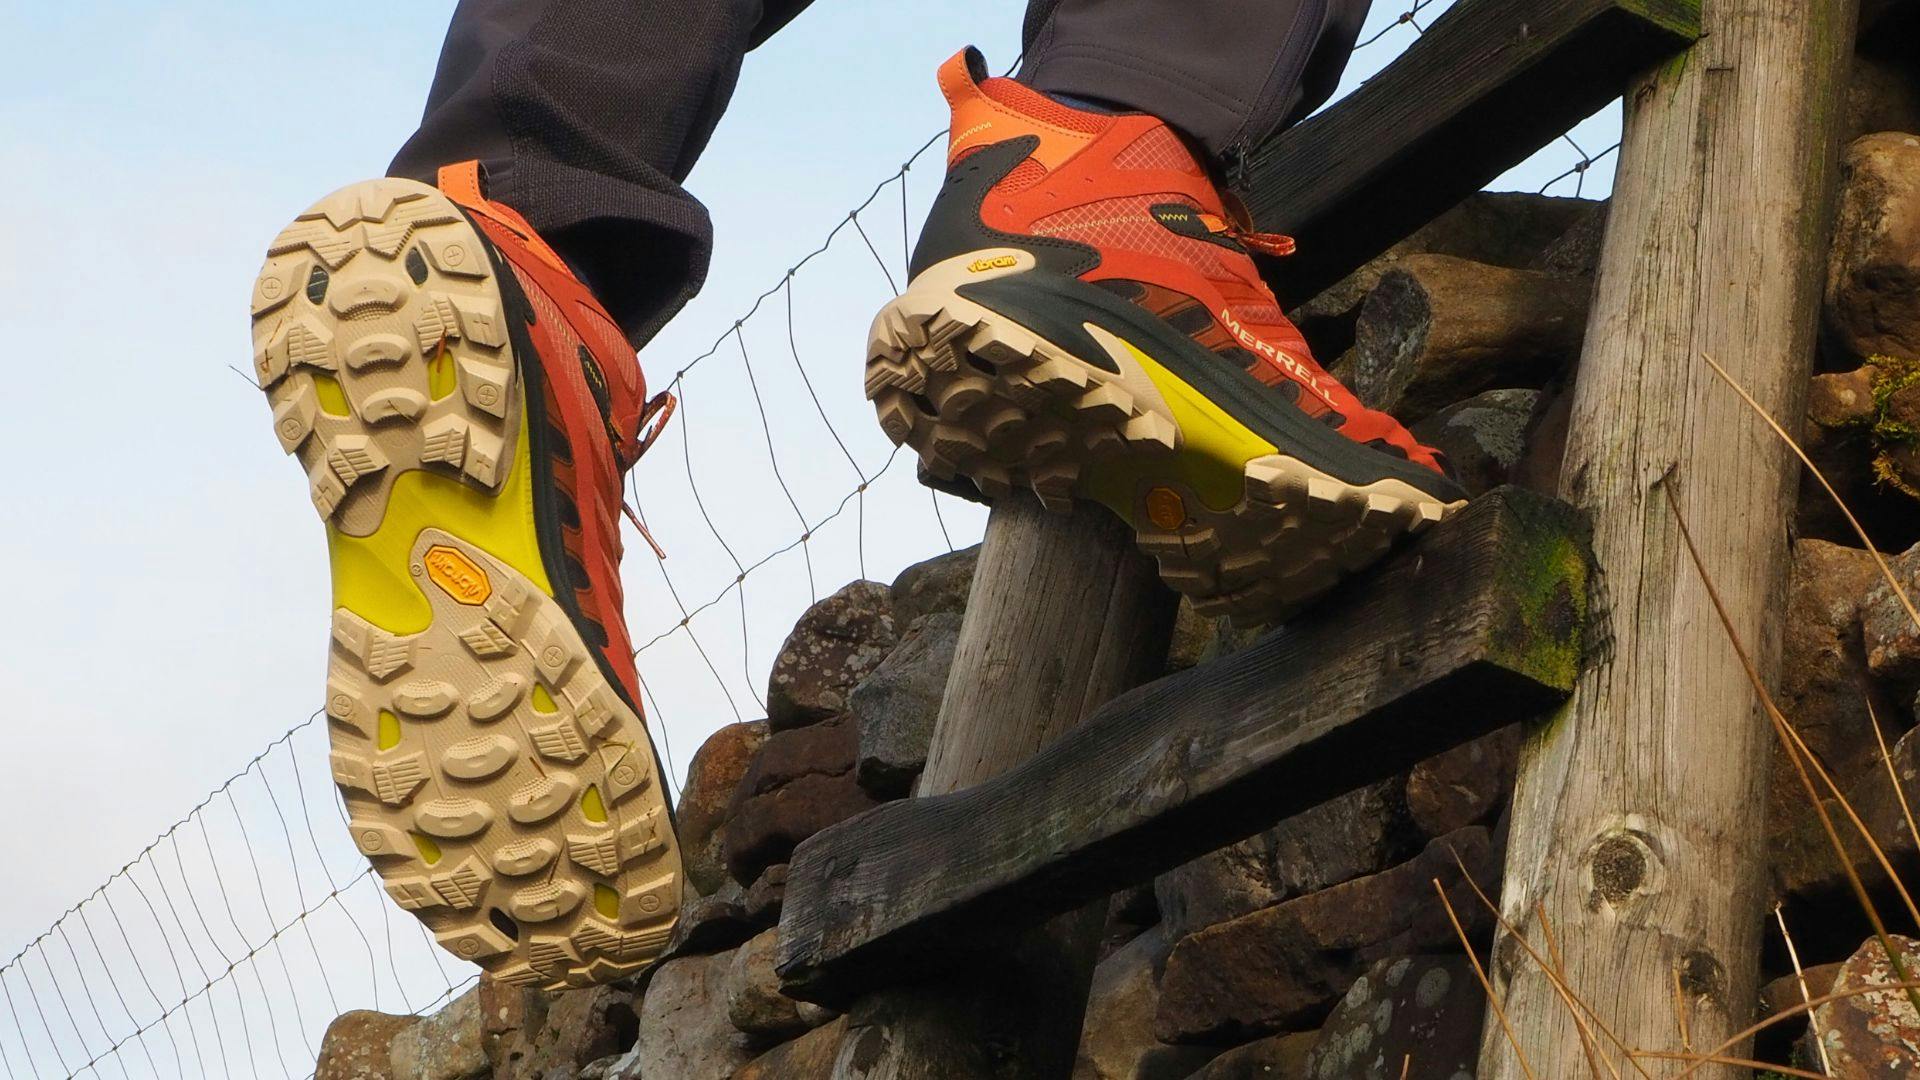 Merrell Moab Speed 2 Mid GTX walking boot tested and reviewed